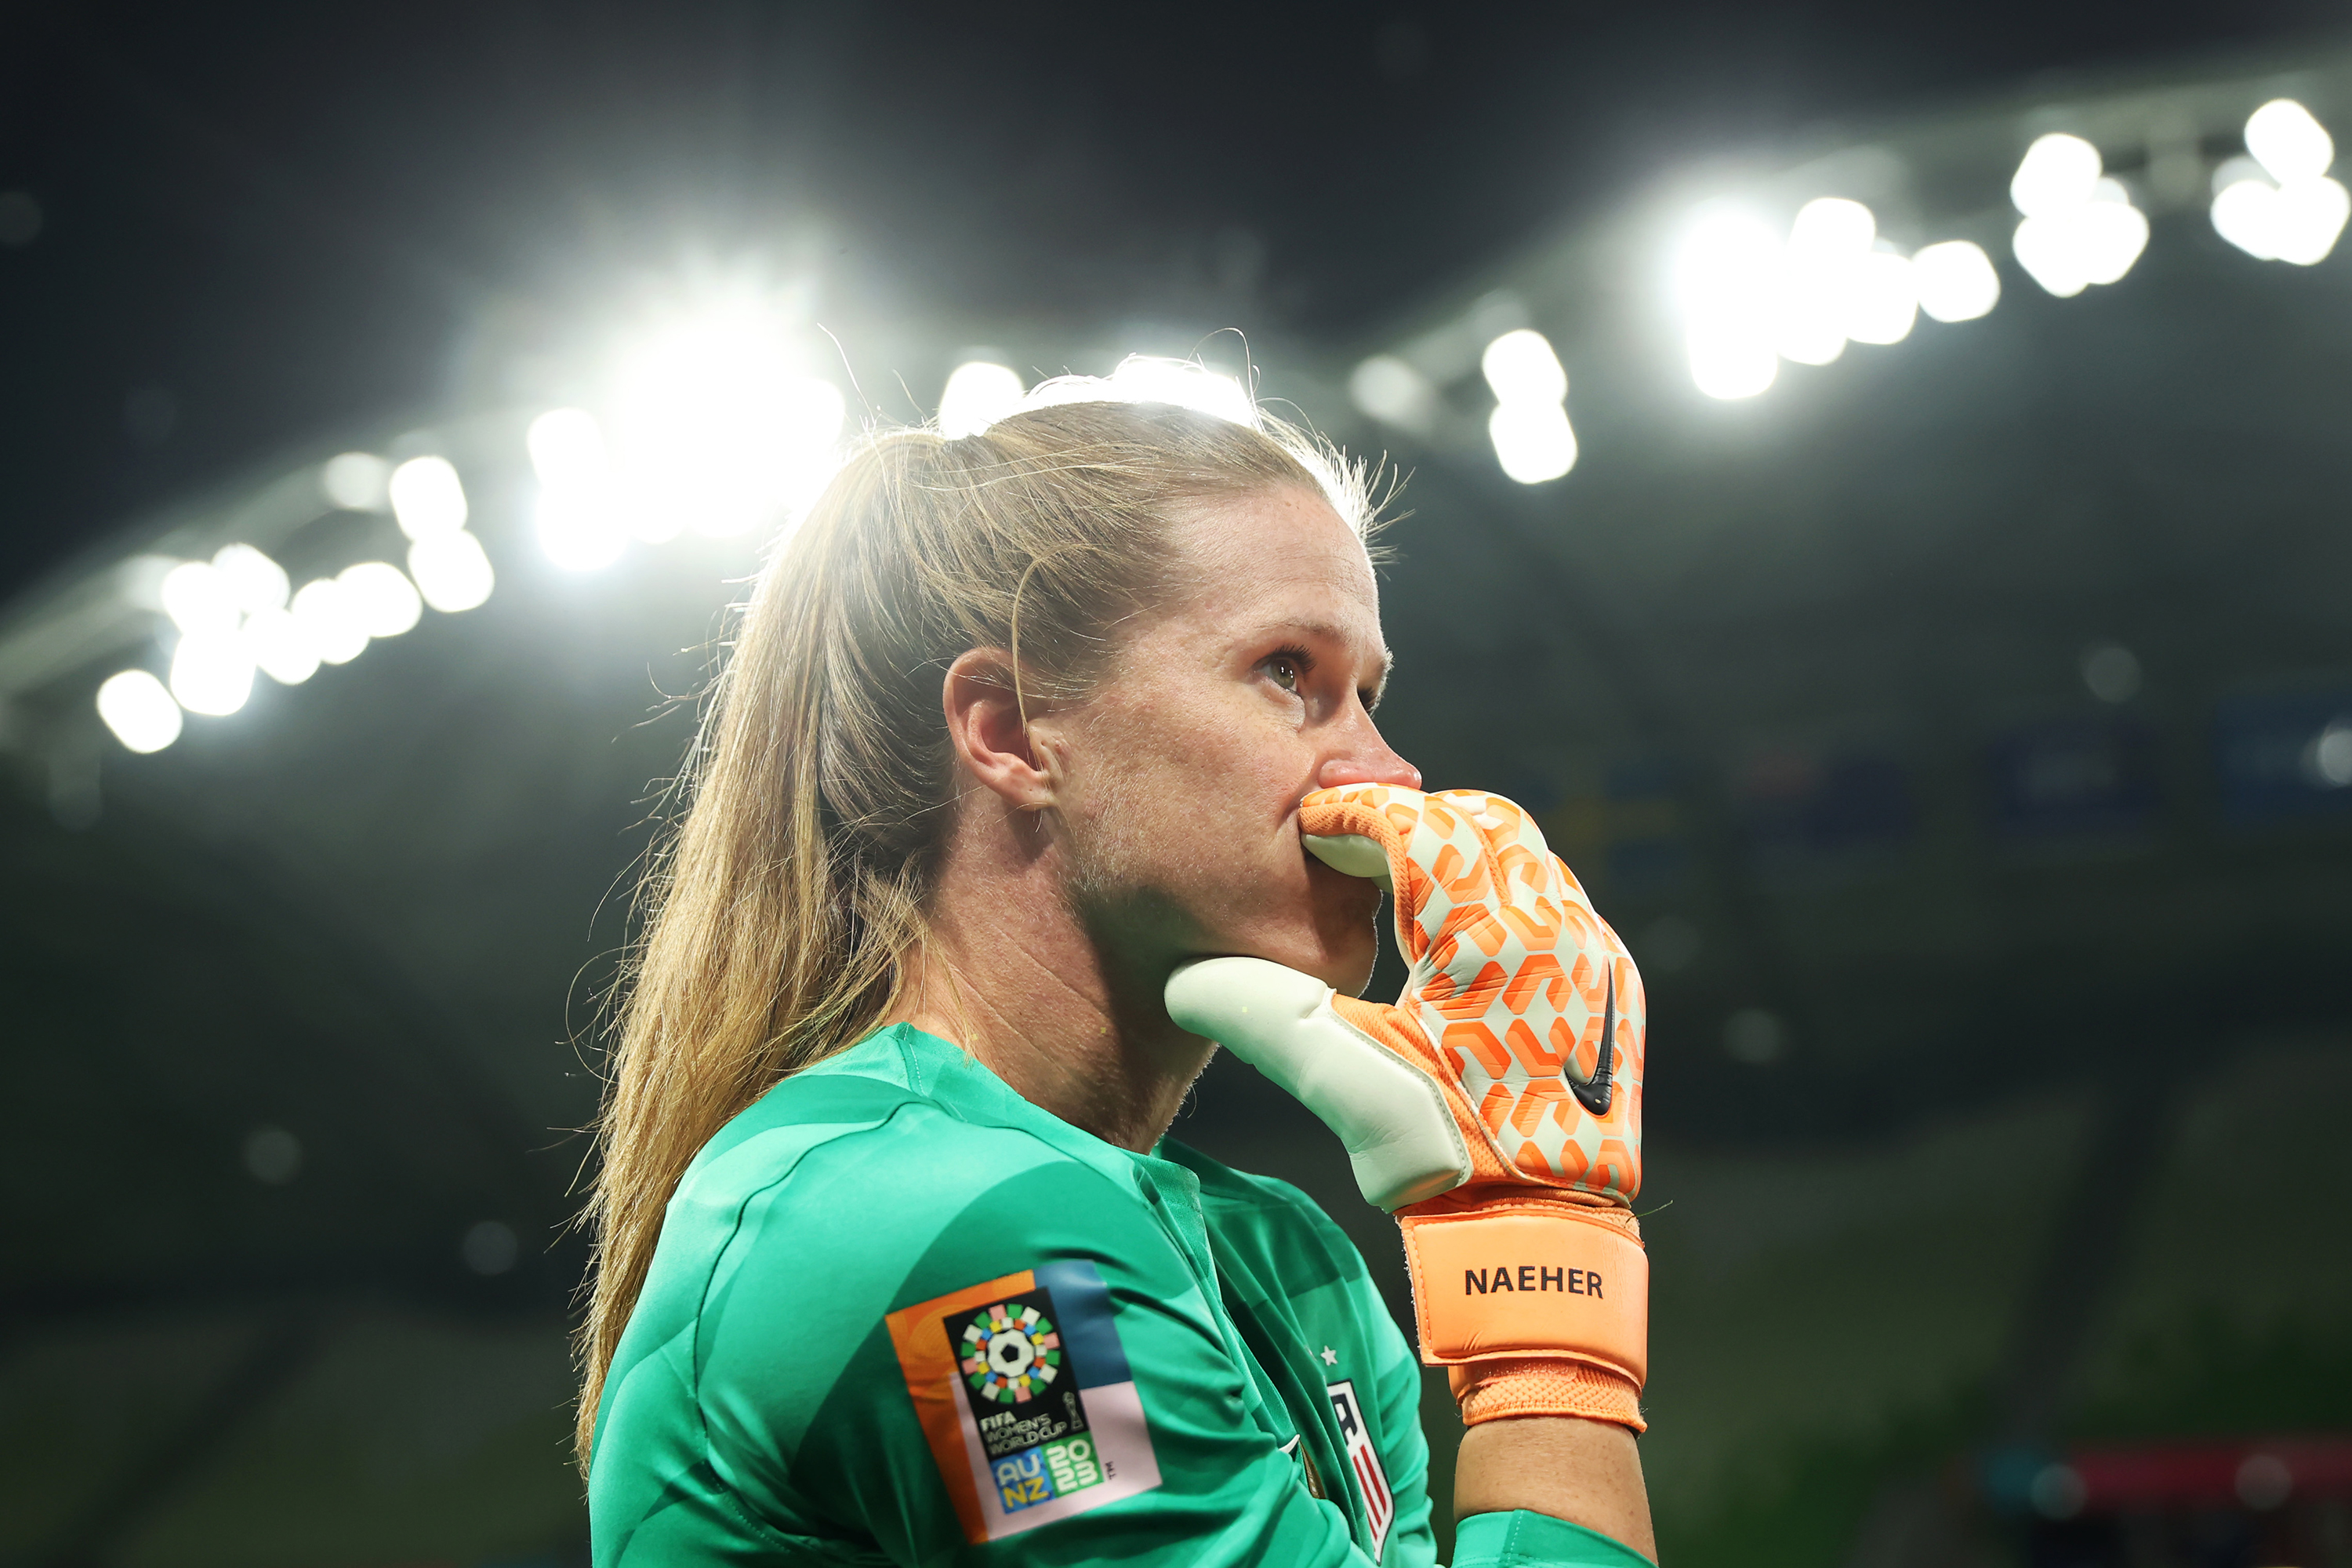 Alyssa Naeher shows dejection after the her team's defeat through the penalty shootout.